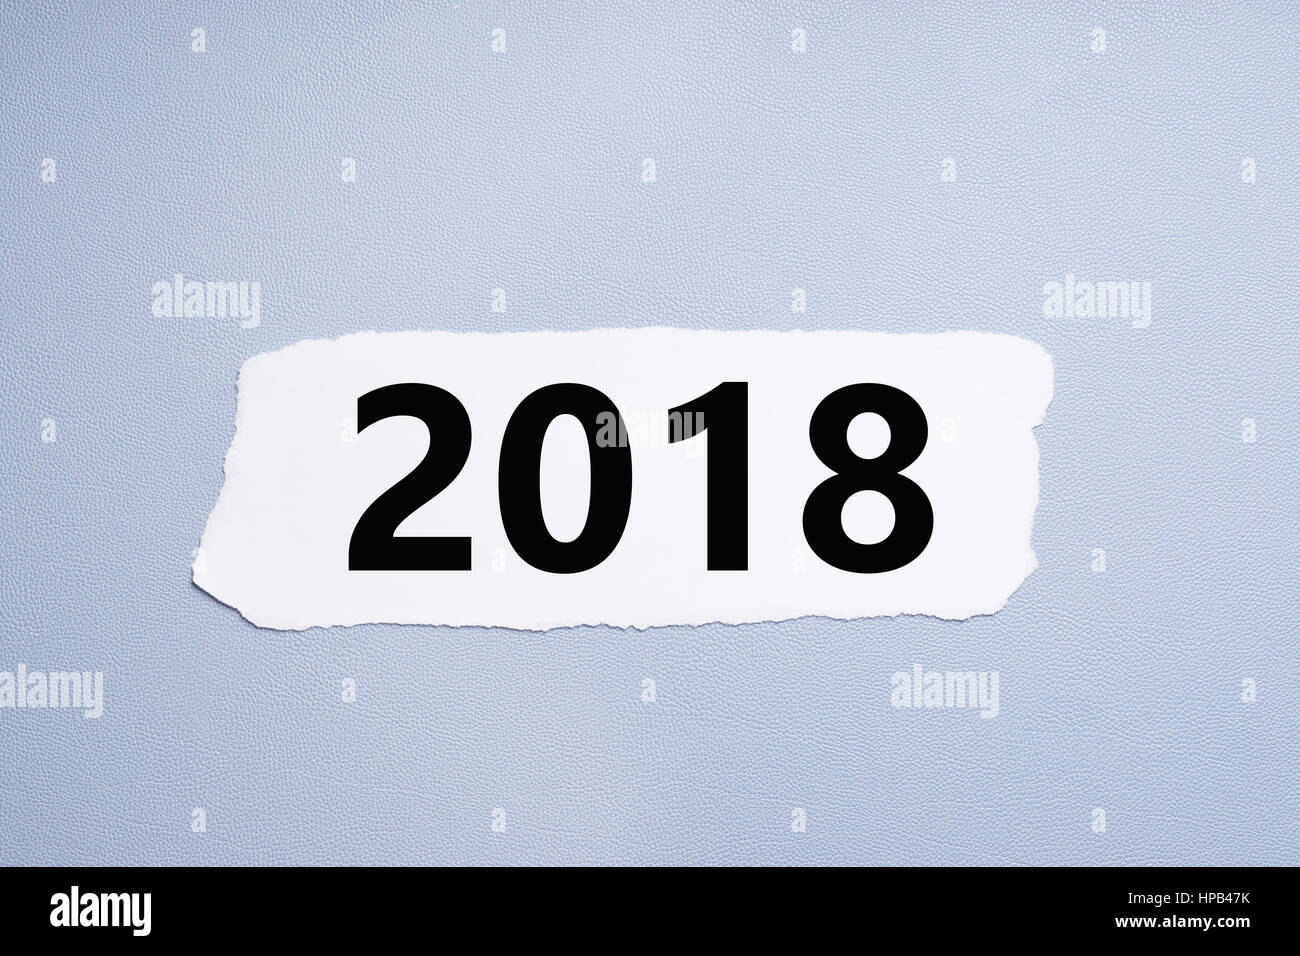 2018 printed on torn piece of paper Stock Photo